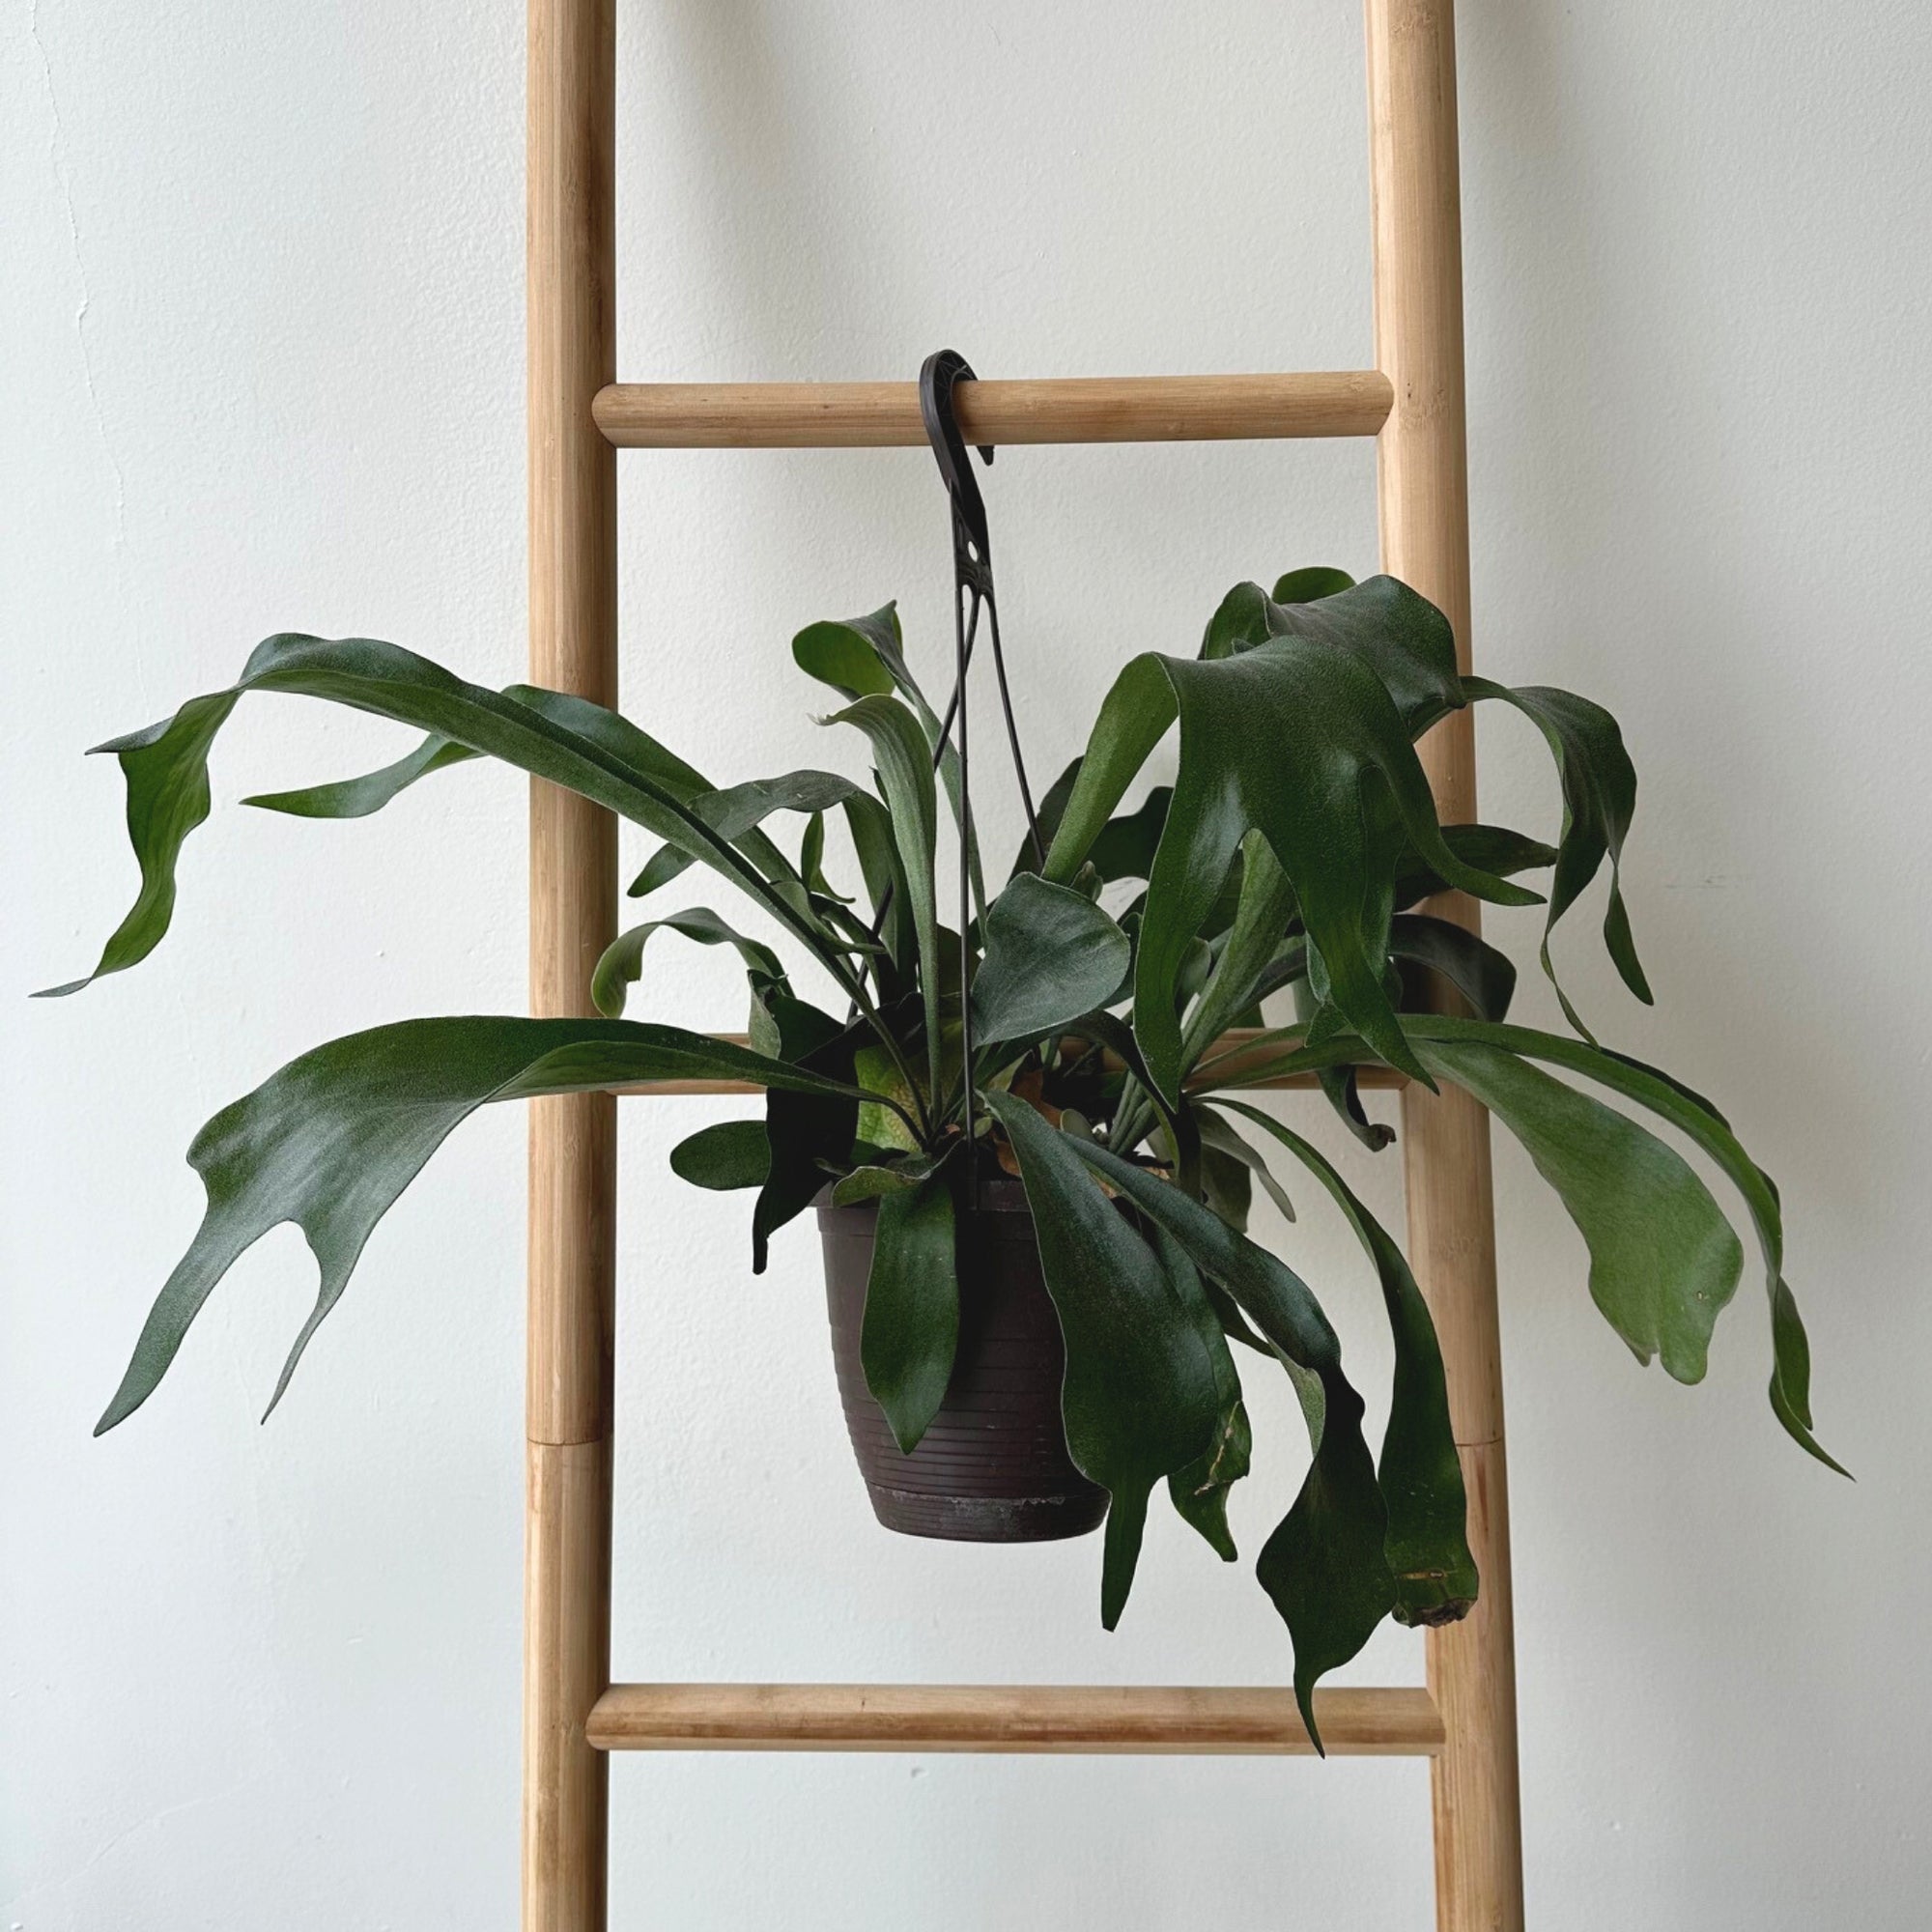 6"Staghorn Fern in Hanging Pot